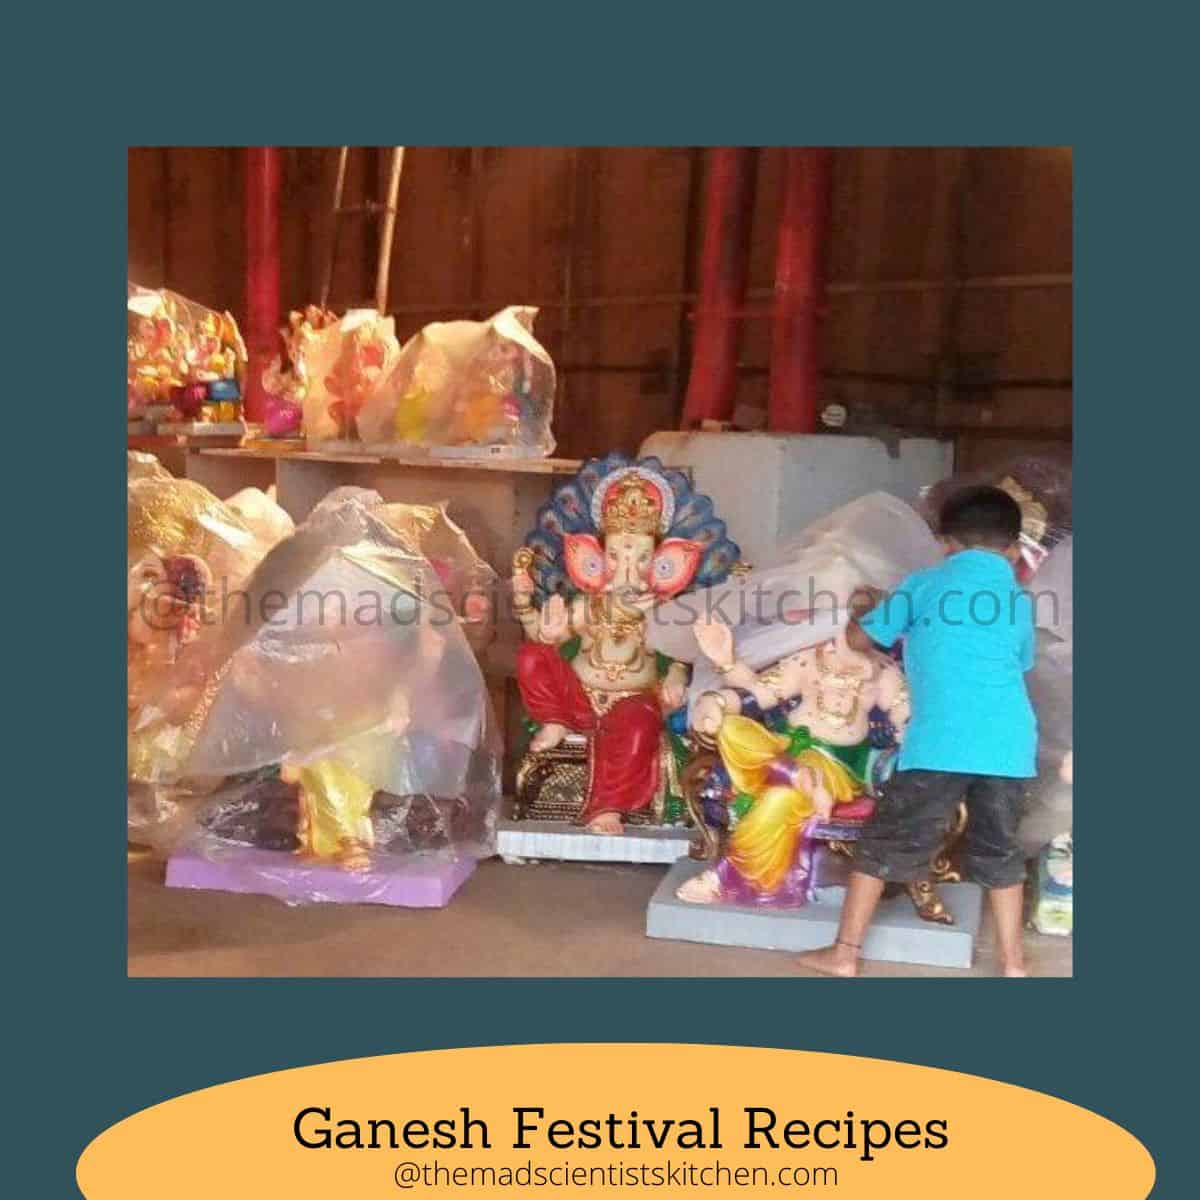 This child captures the essence of Ganesh Festival. I guess he is choosing the idol that will be carried home.